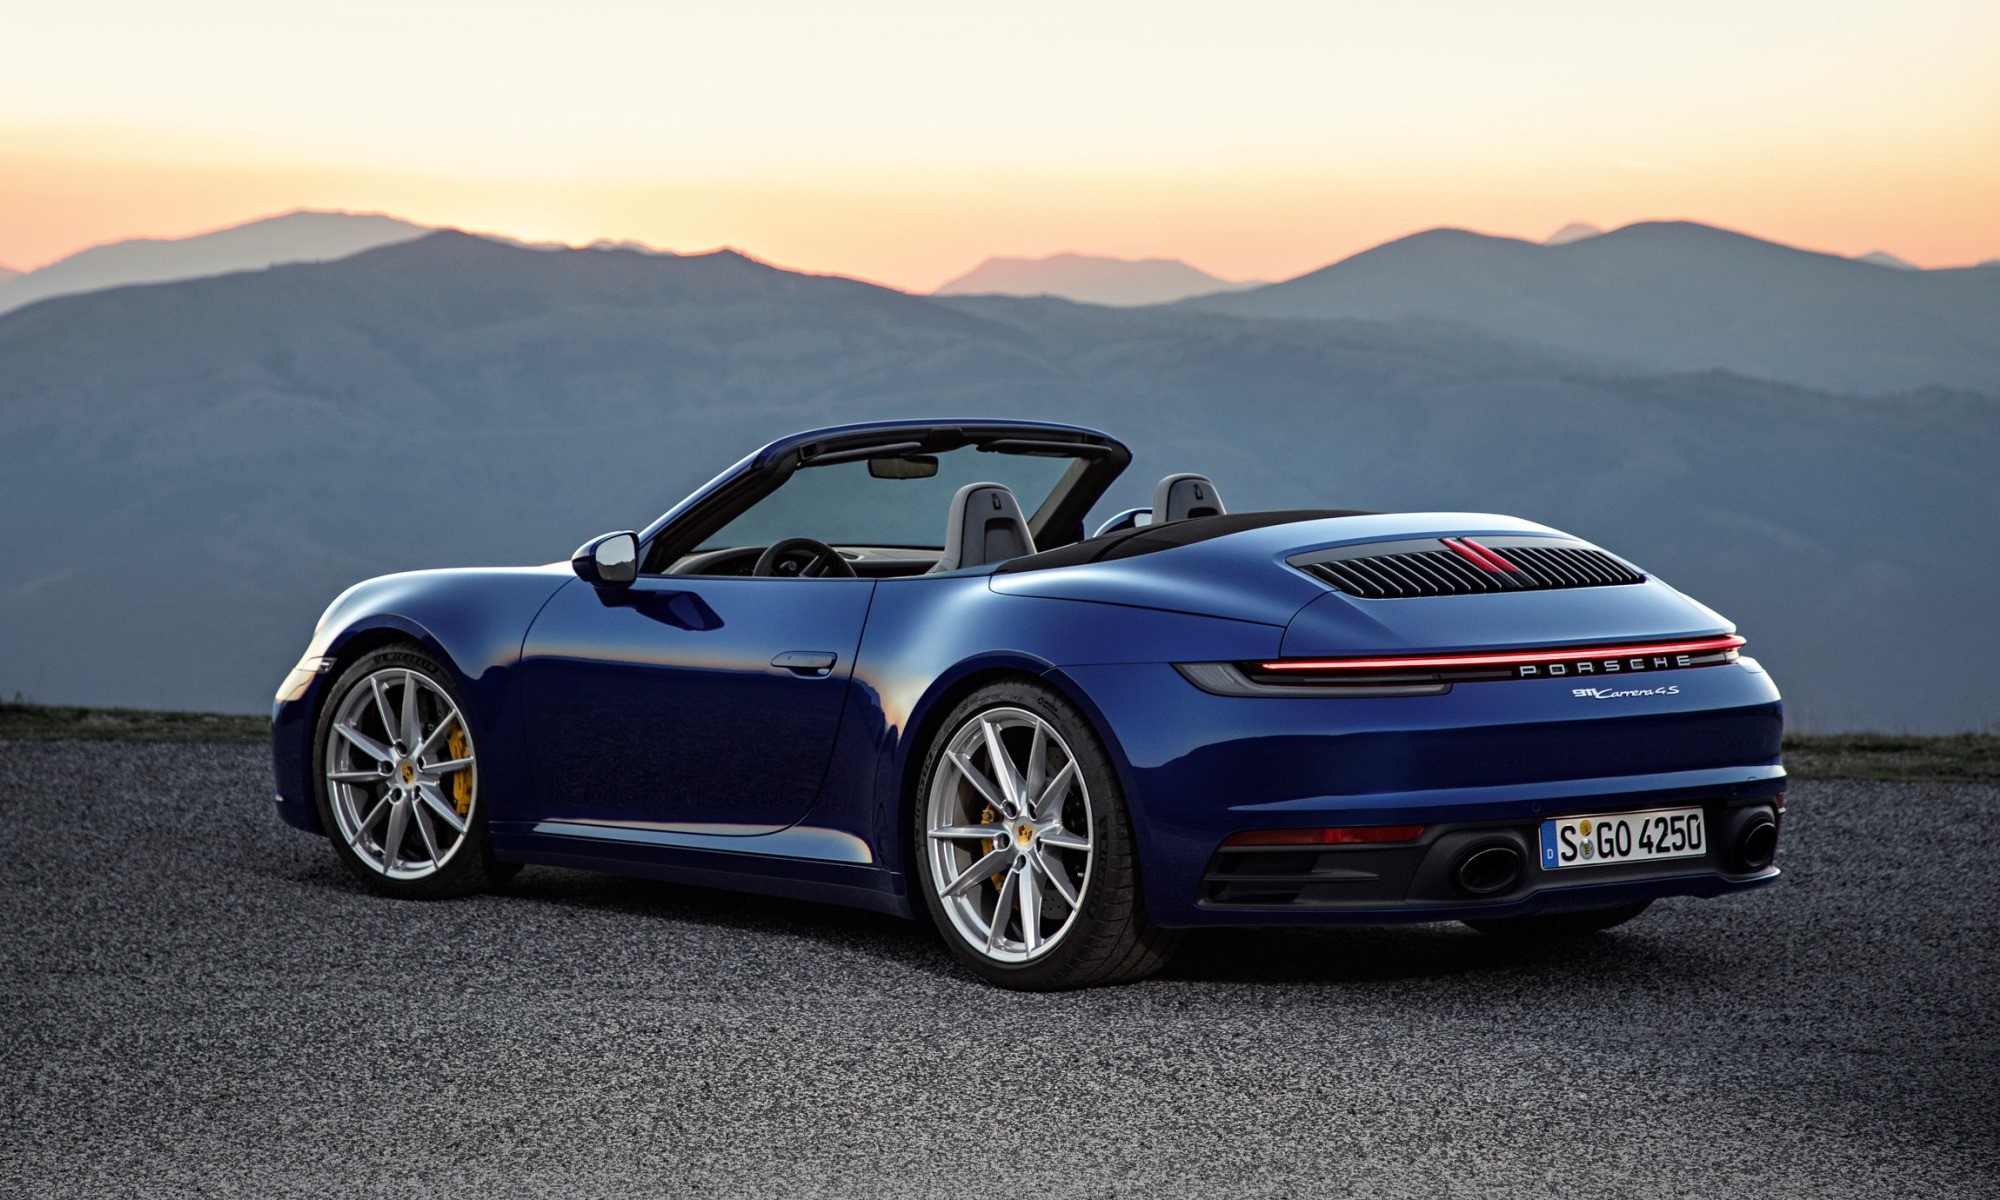 New Porsche 911 Cabriolet debuts only a few weeks after the coupe